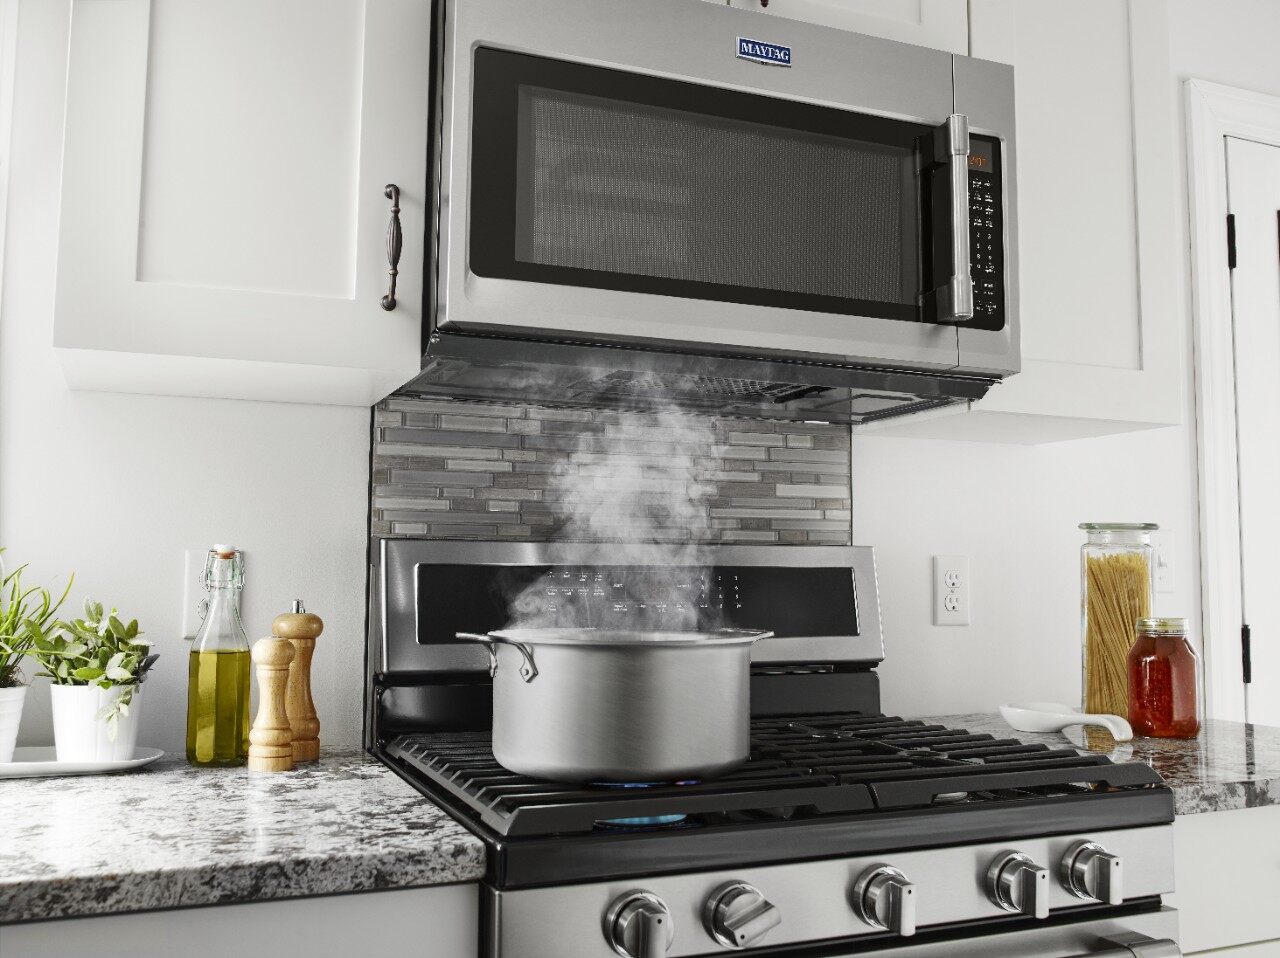 The Maytag mmv4206fz over the range microwave over a gas range 